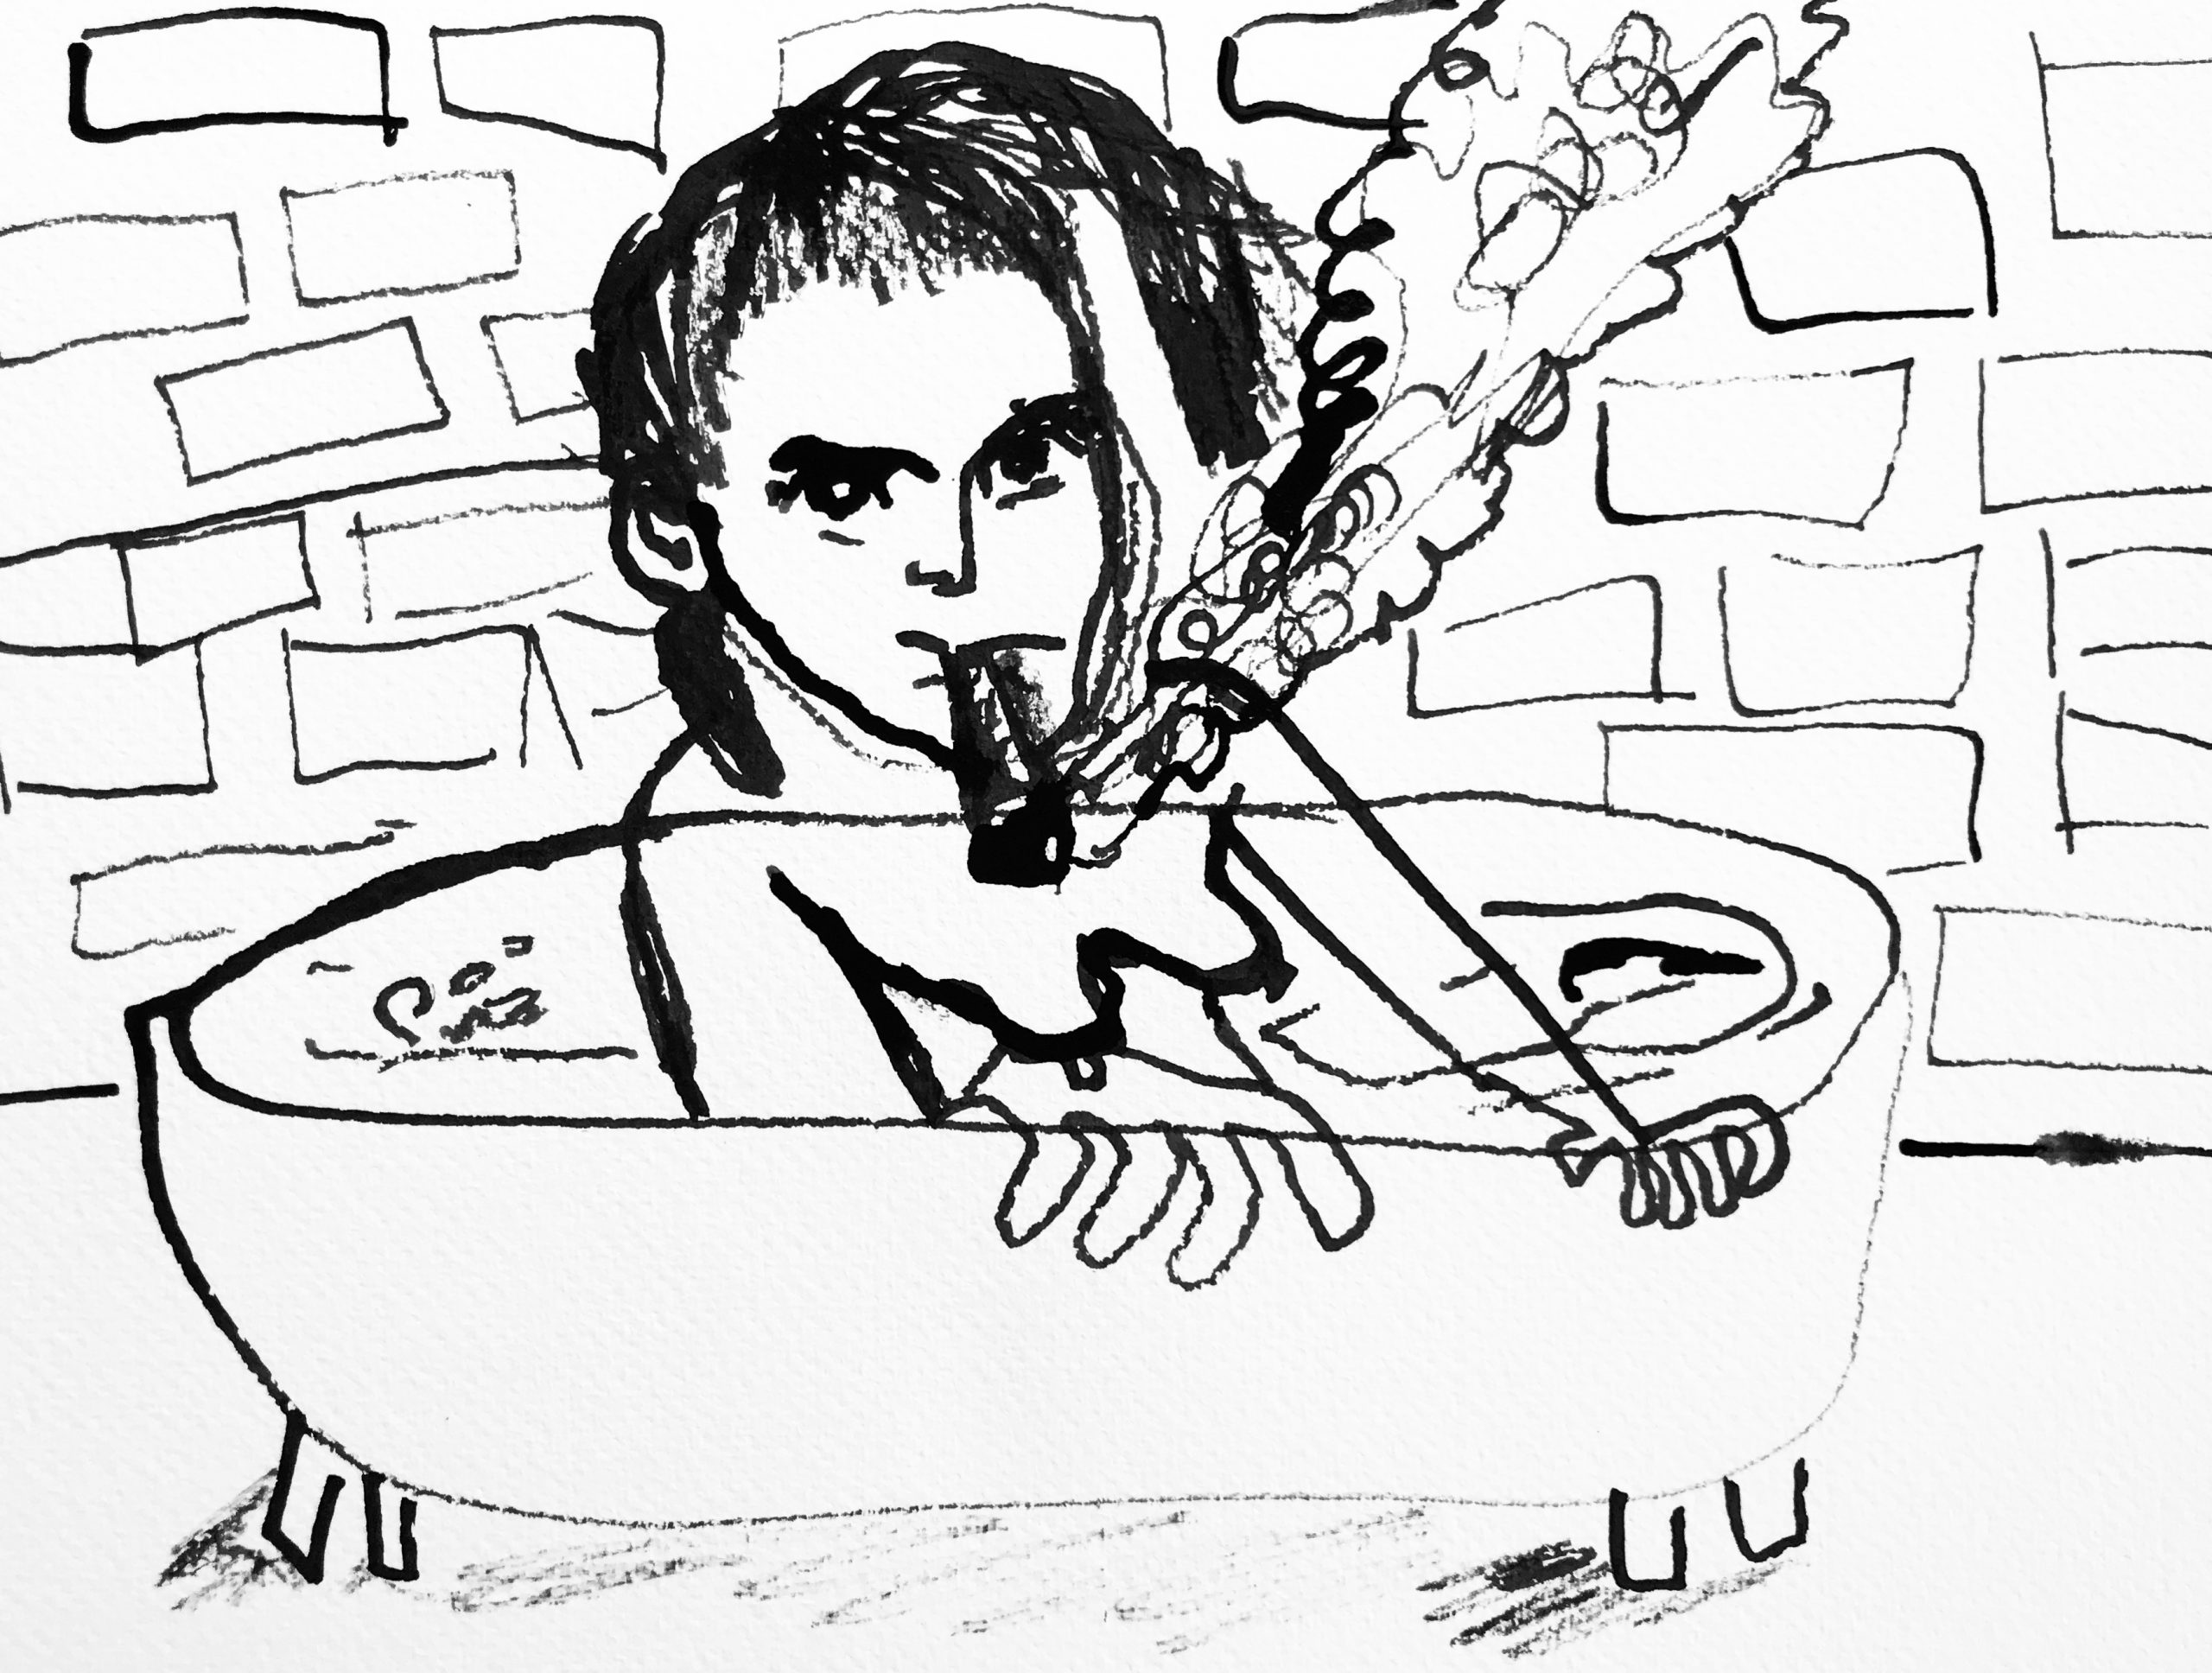 Black ink on white of person in tub smoking a cigar